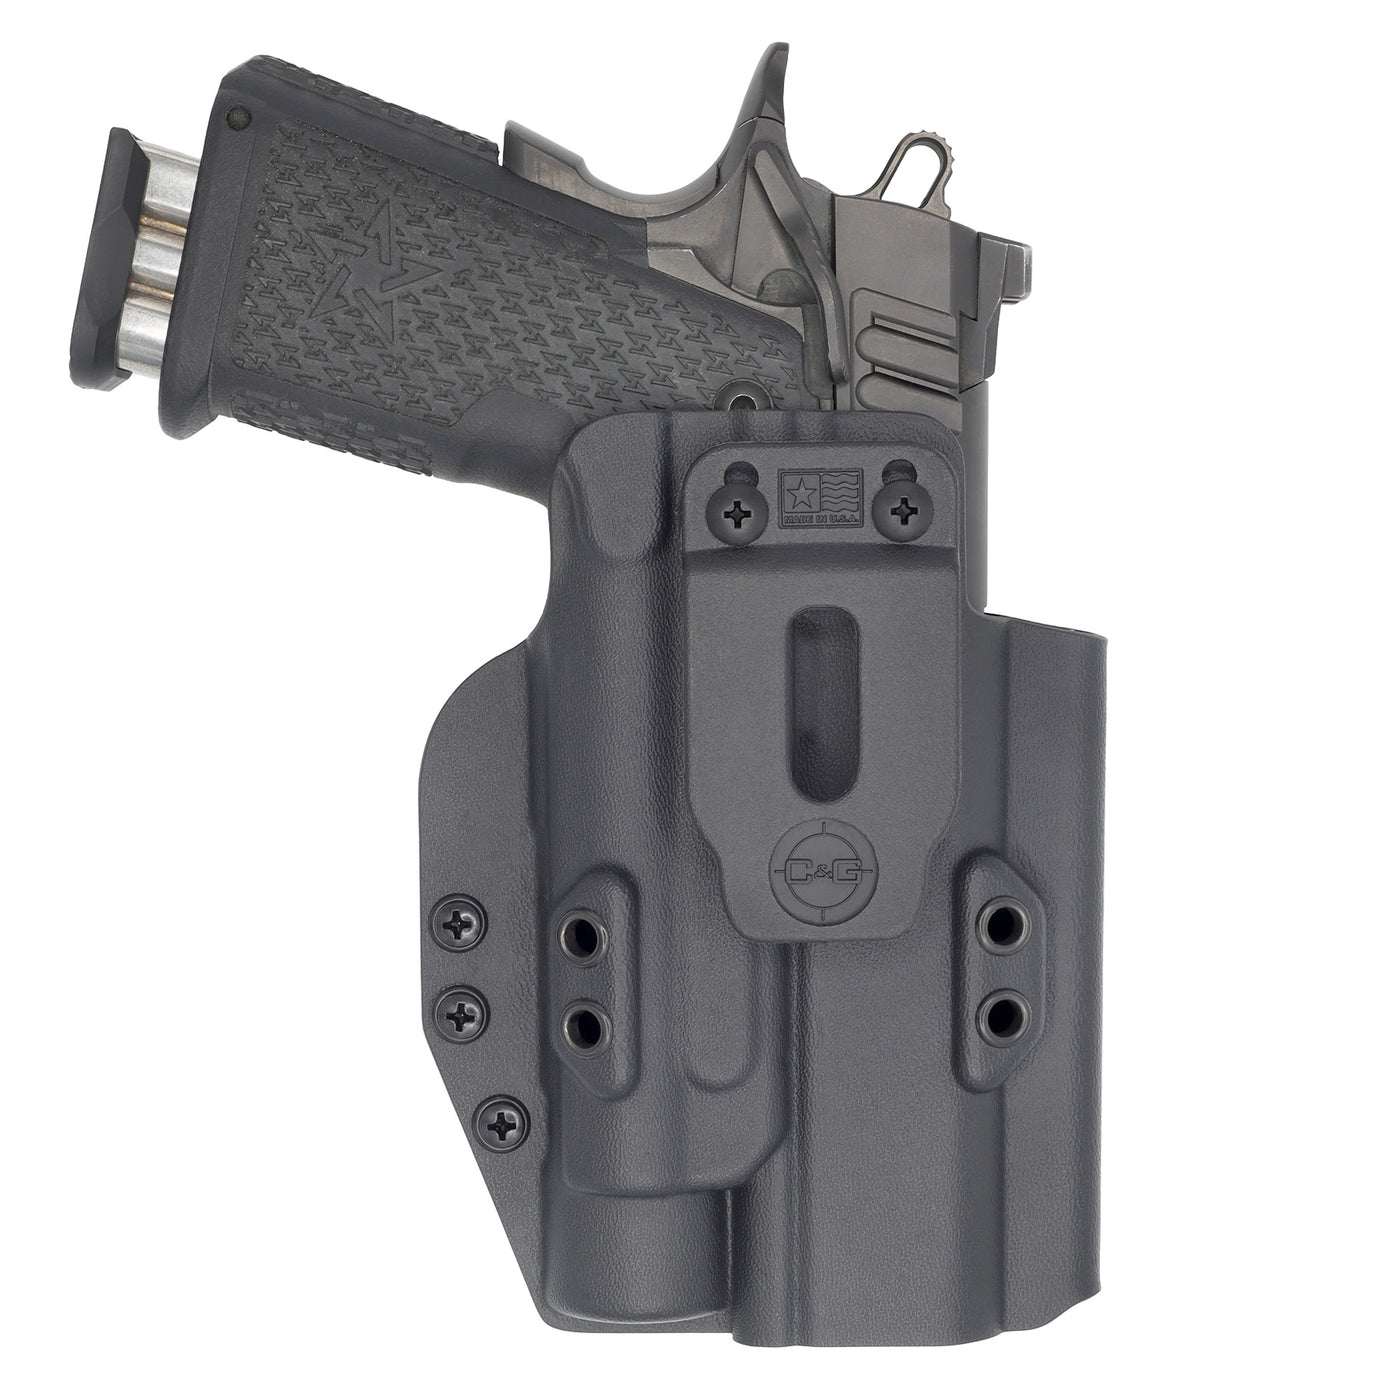 C&G Holsters custom IWB Tactical staccato TLR1 in holstered position